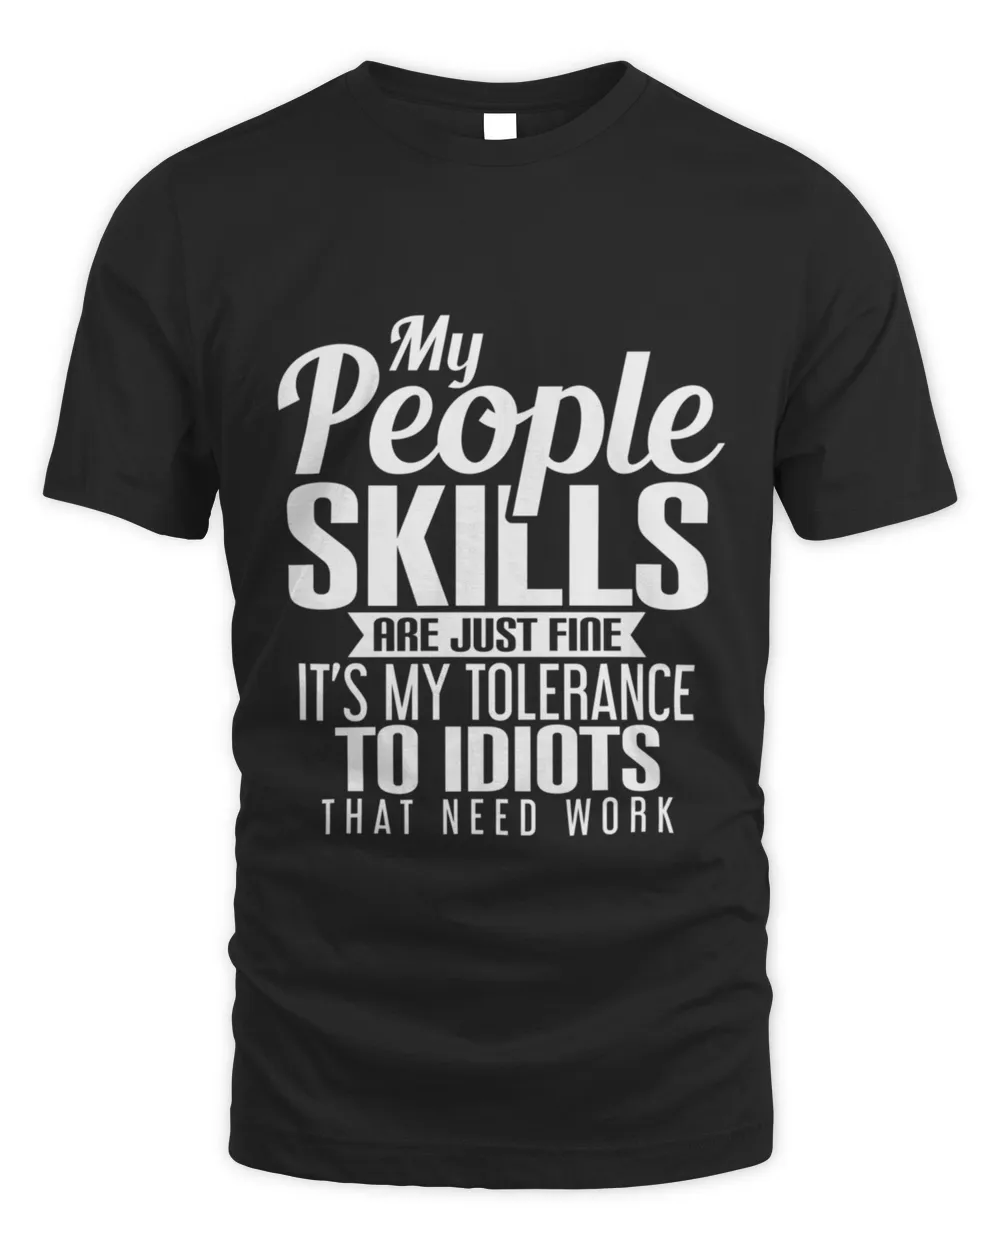 My People Skills Are Fine My Tolerance To Idiots Need Work T-Shirt